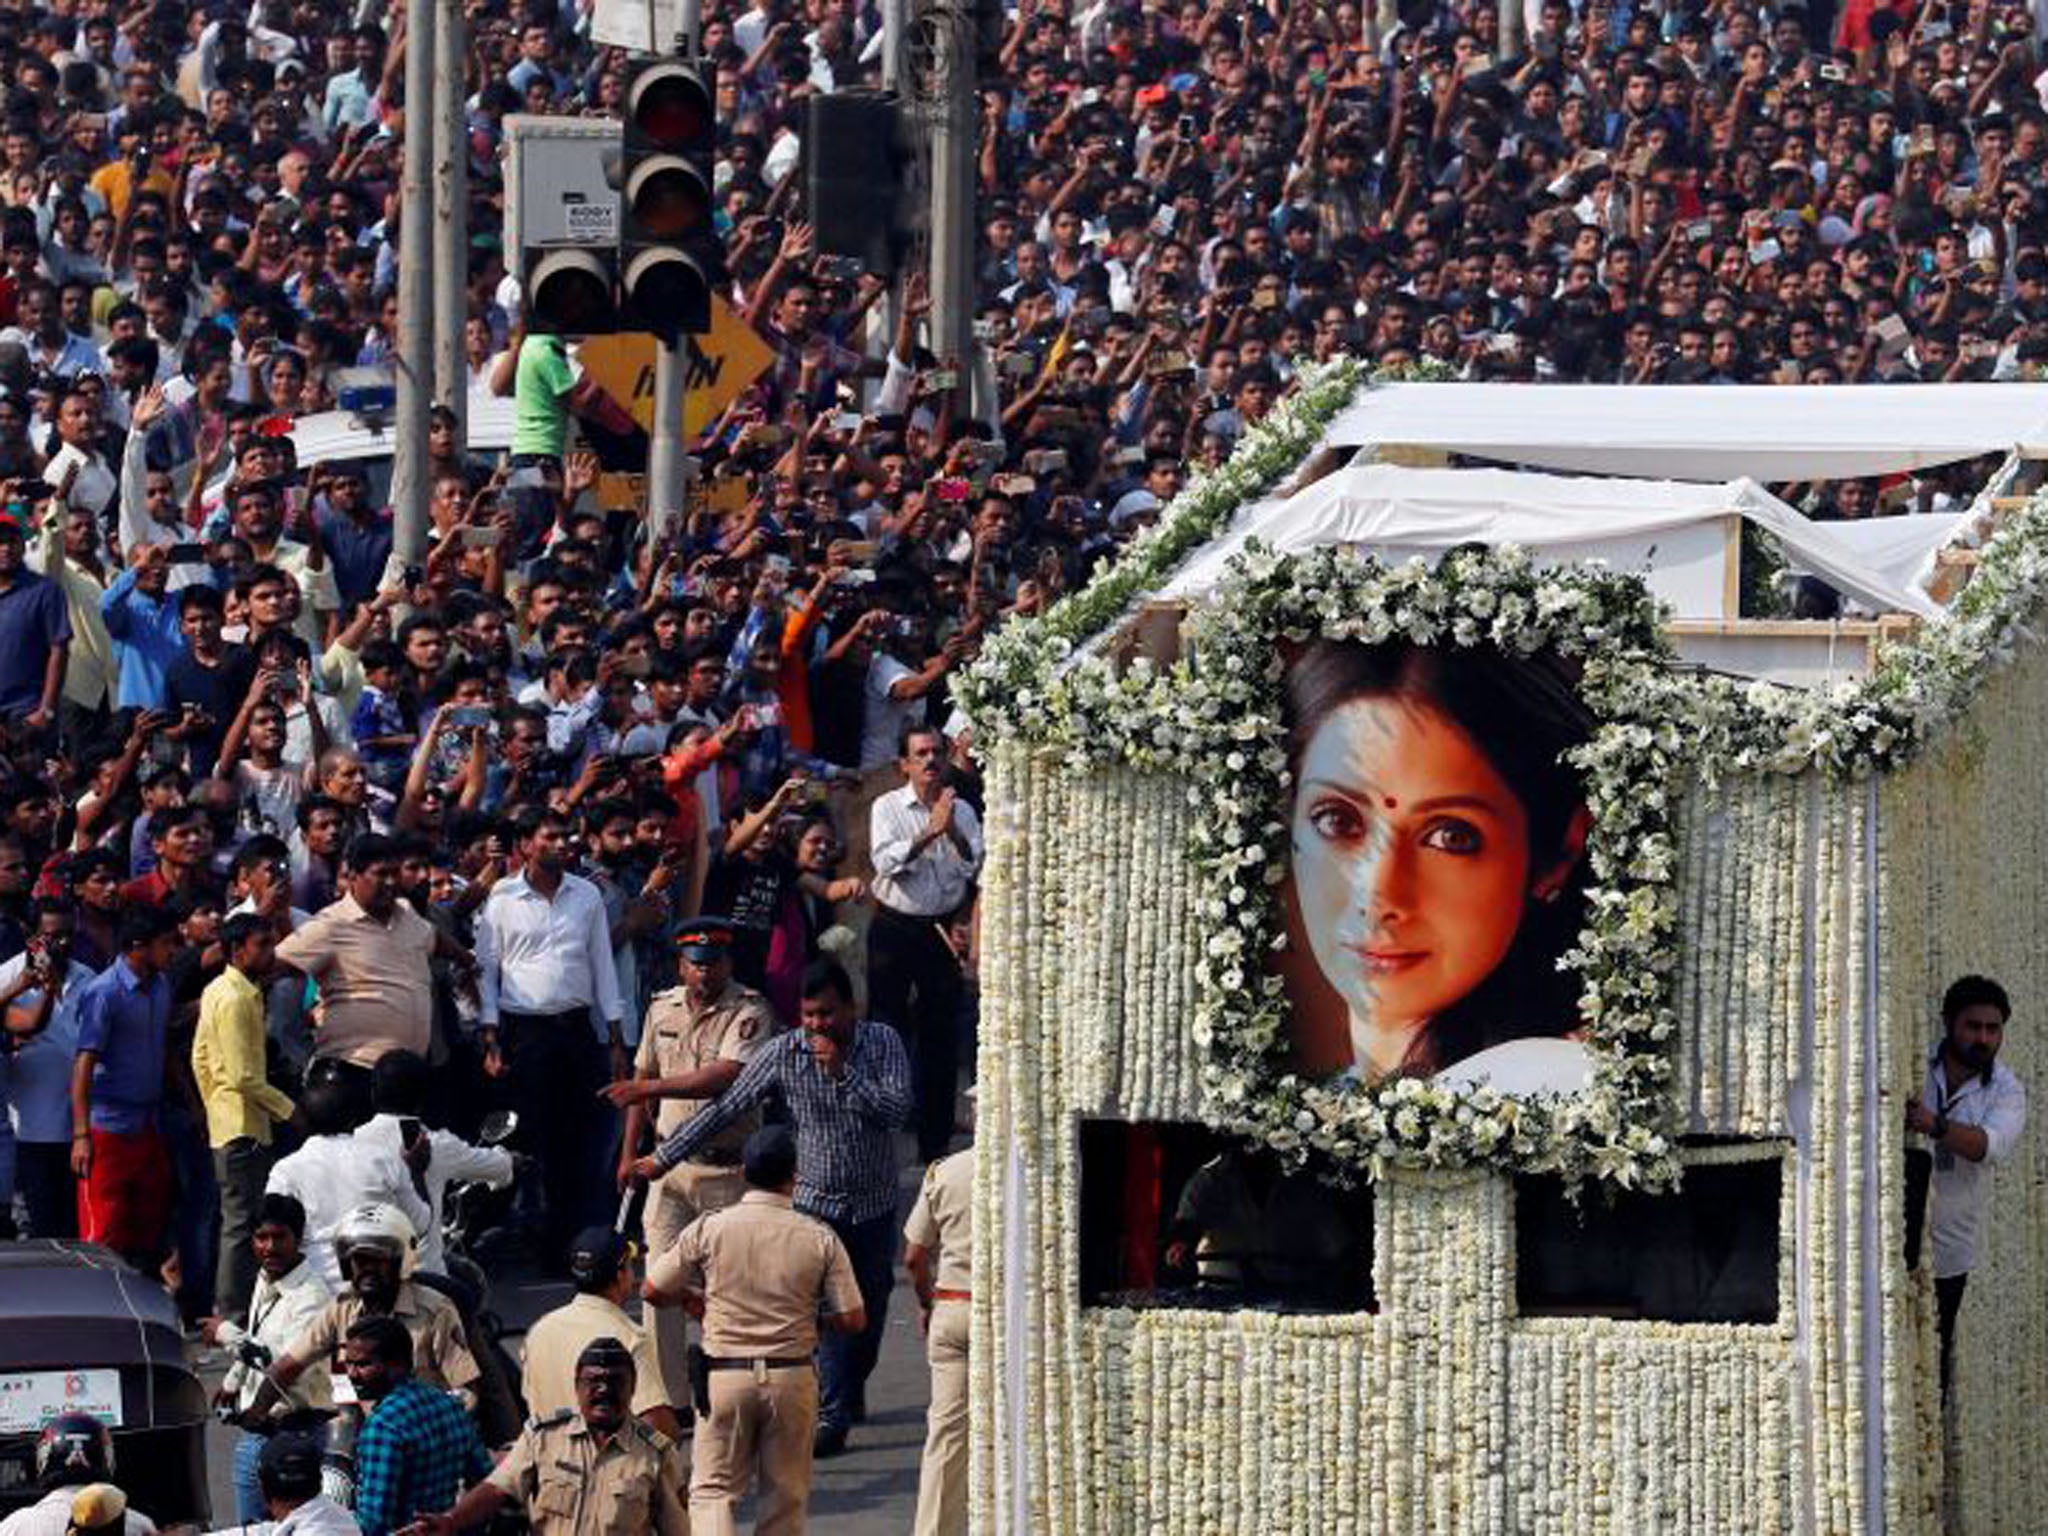 The body of Bollywood actress Sridevi is carried in a truck during her funeral procession in Mumbai